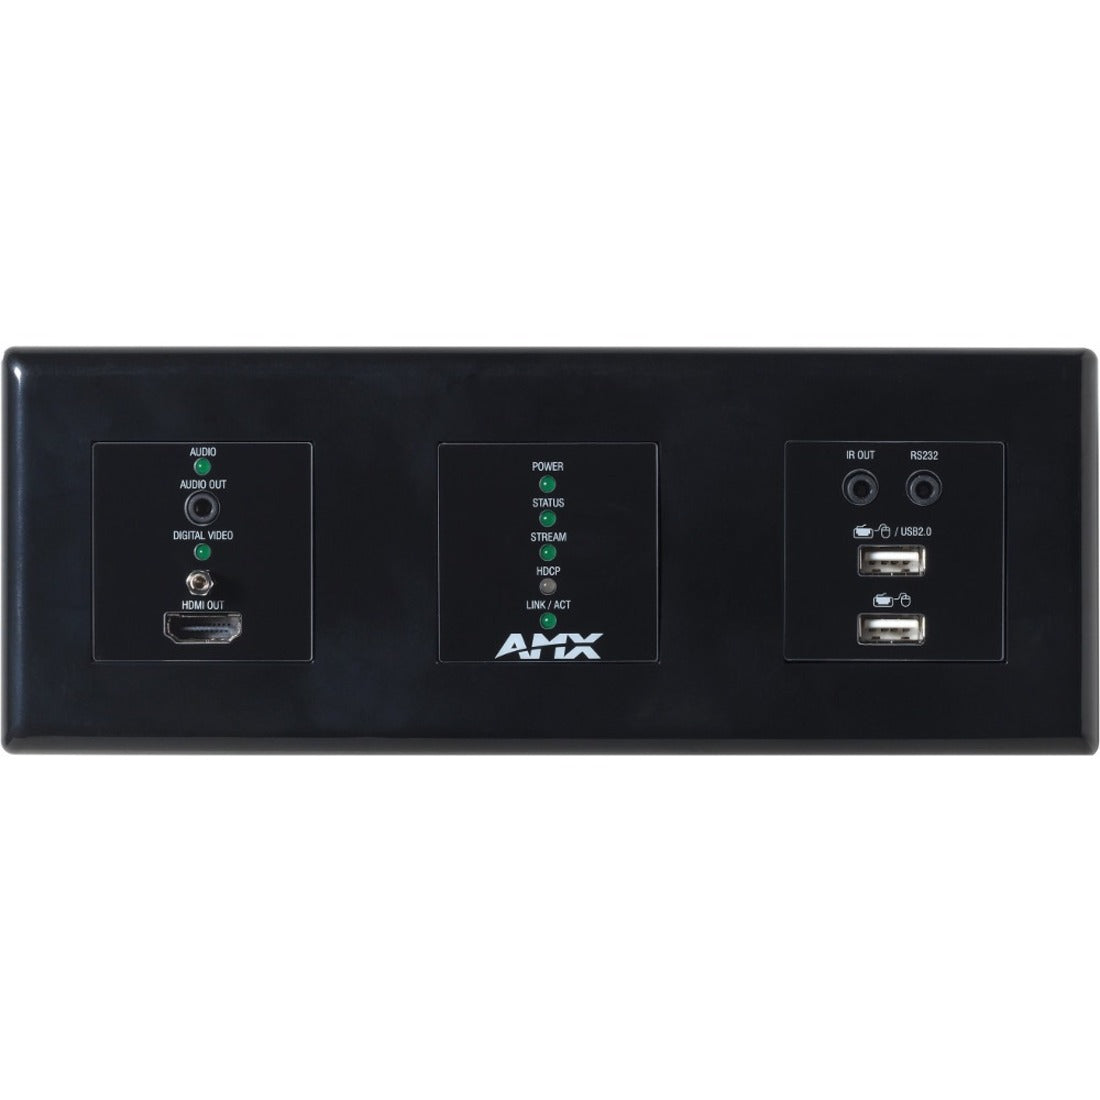 AMX AMX-N26D012 NMX-DEC-N2625-WP Decoder Wallplate, HDMI Port, for Corporate, Casino, Hospitality, Government